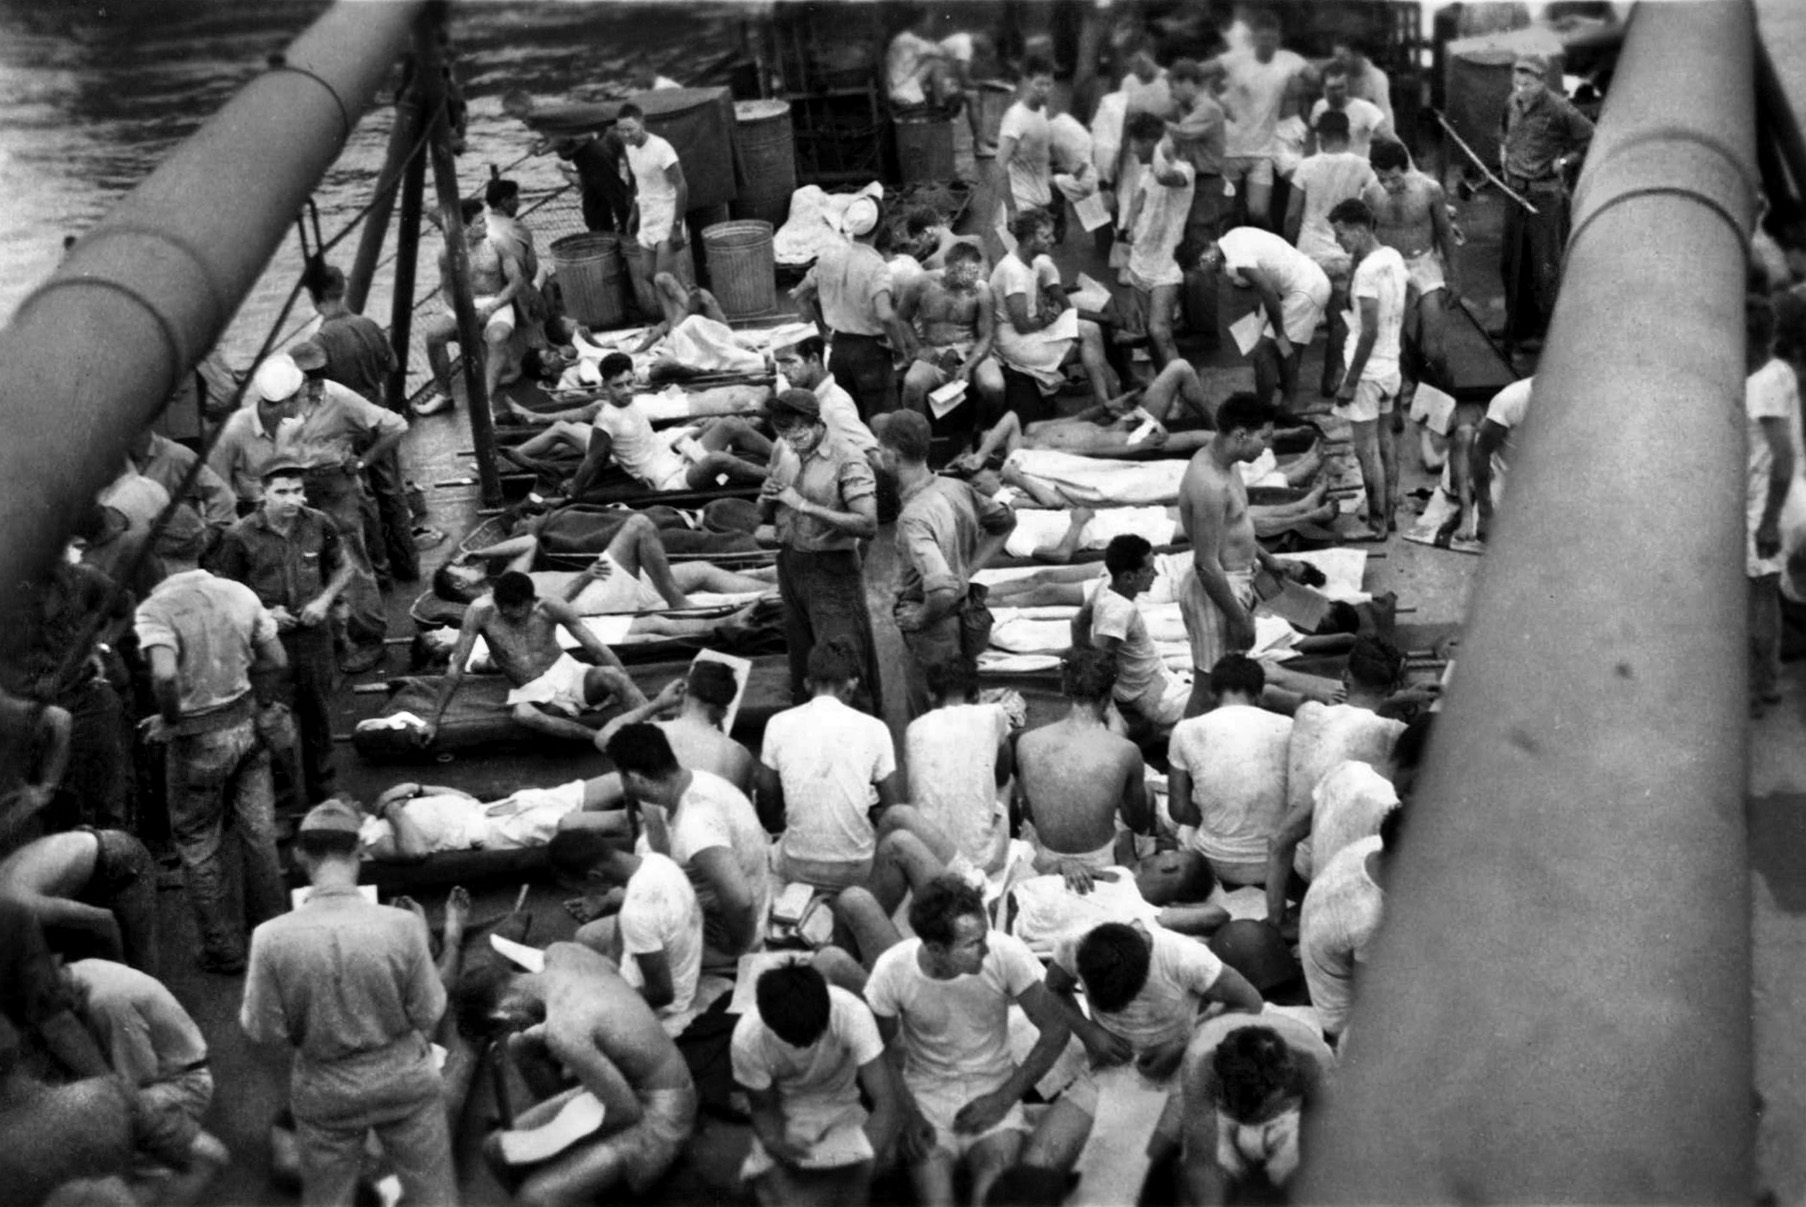 Rescued Indy survivors in clean clothes crowd the deck of the high-speed transport USS Bassett. The Navy kept the lid on news of the sinking until after the war. 